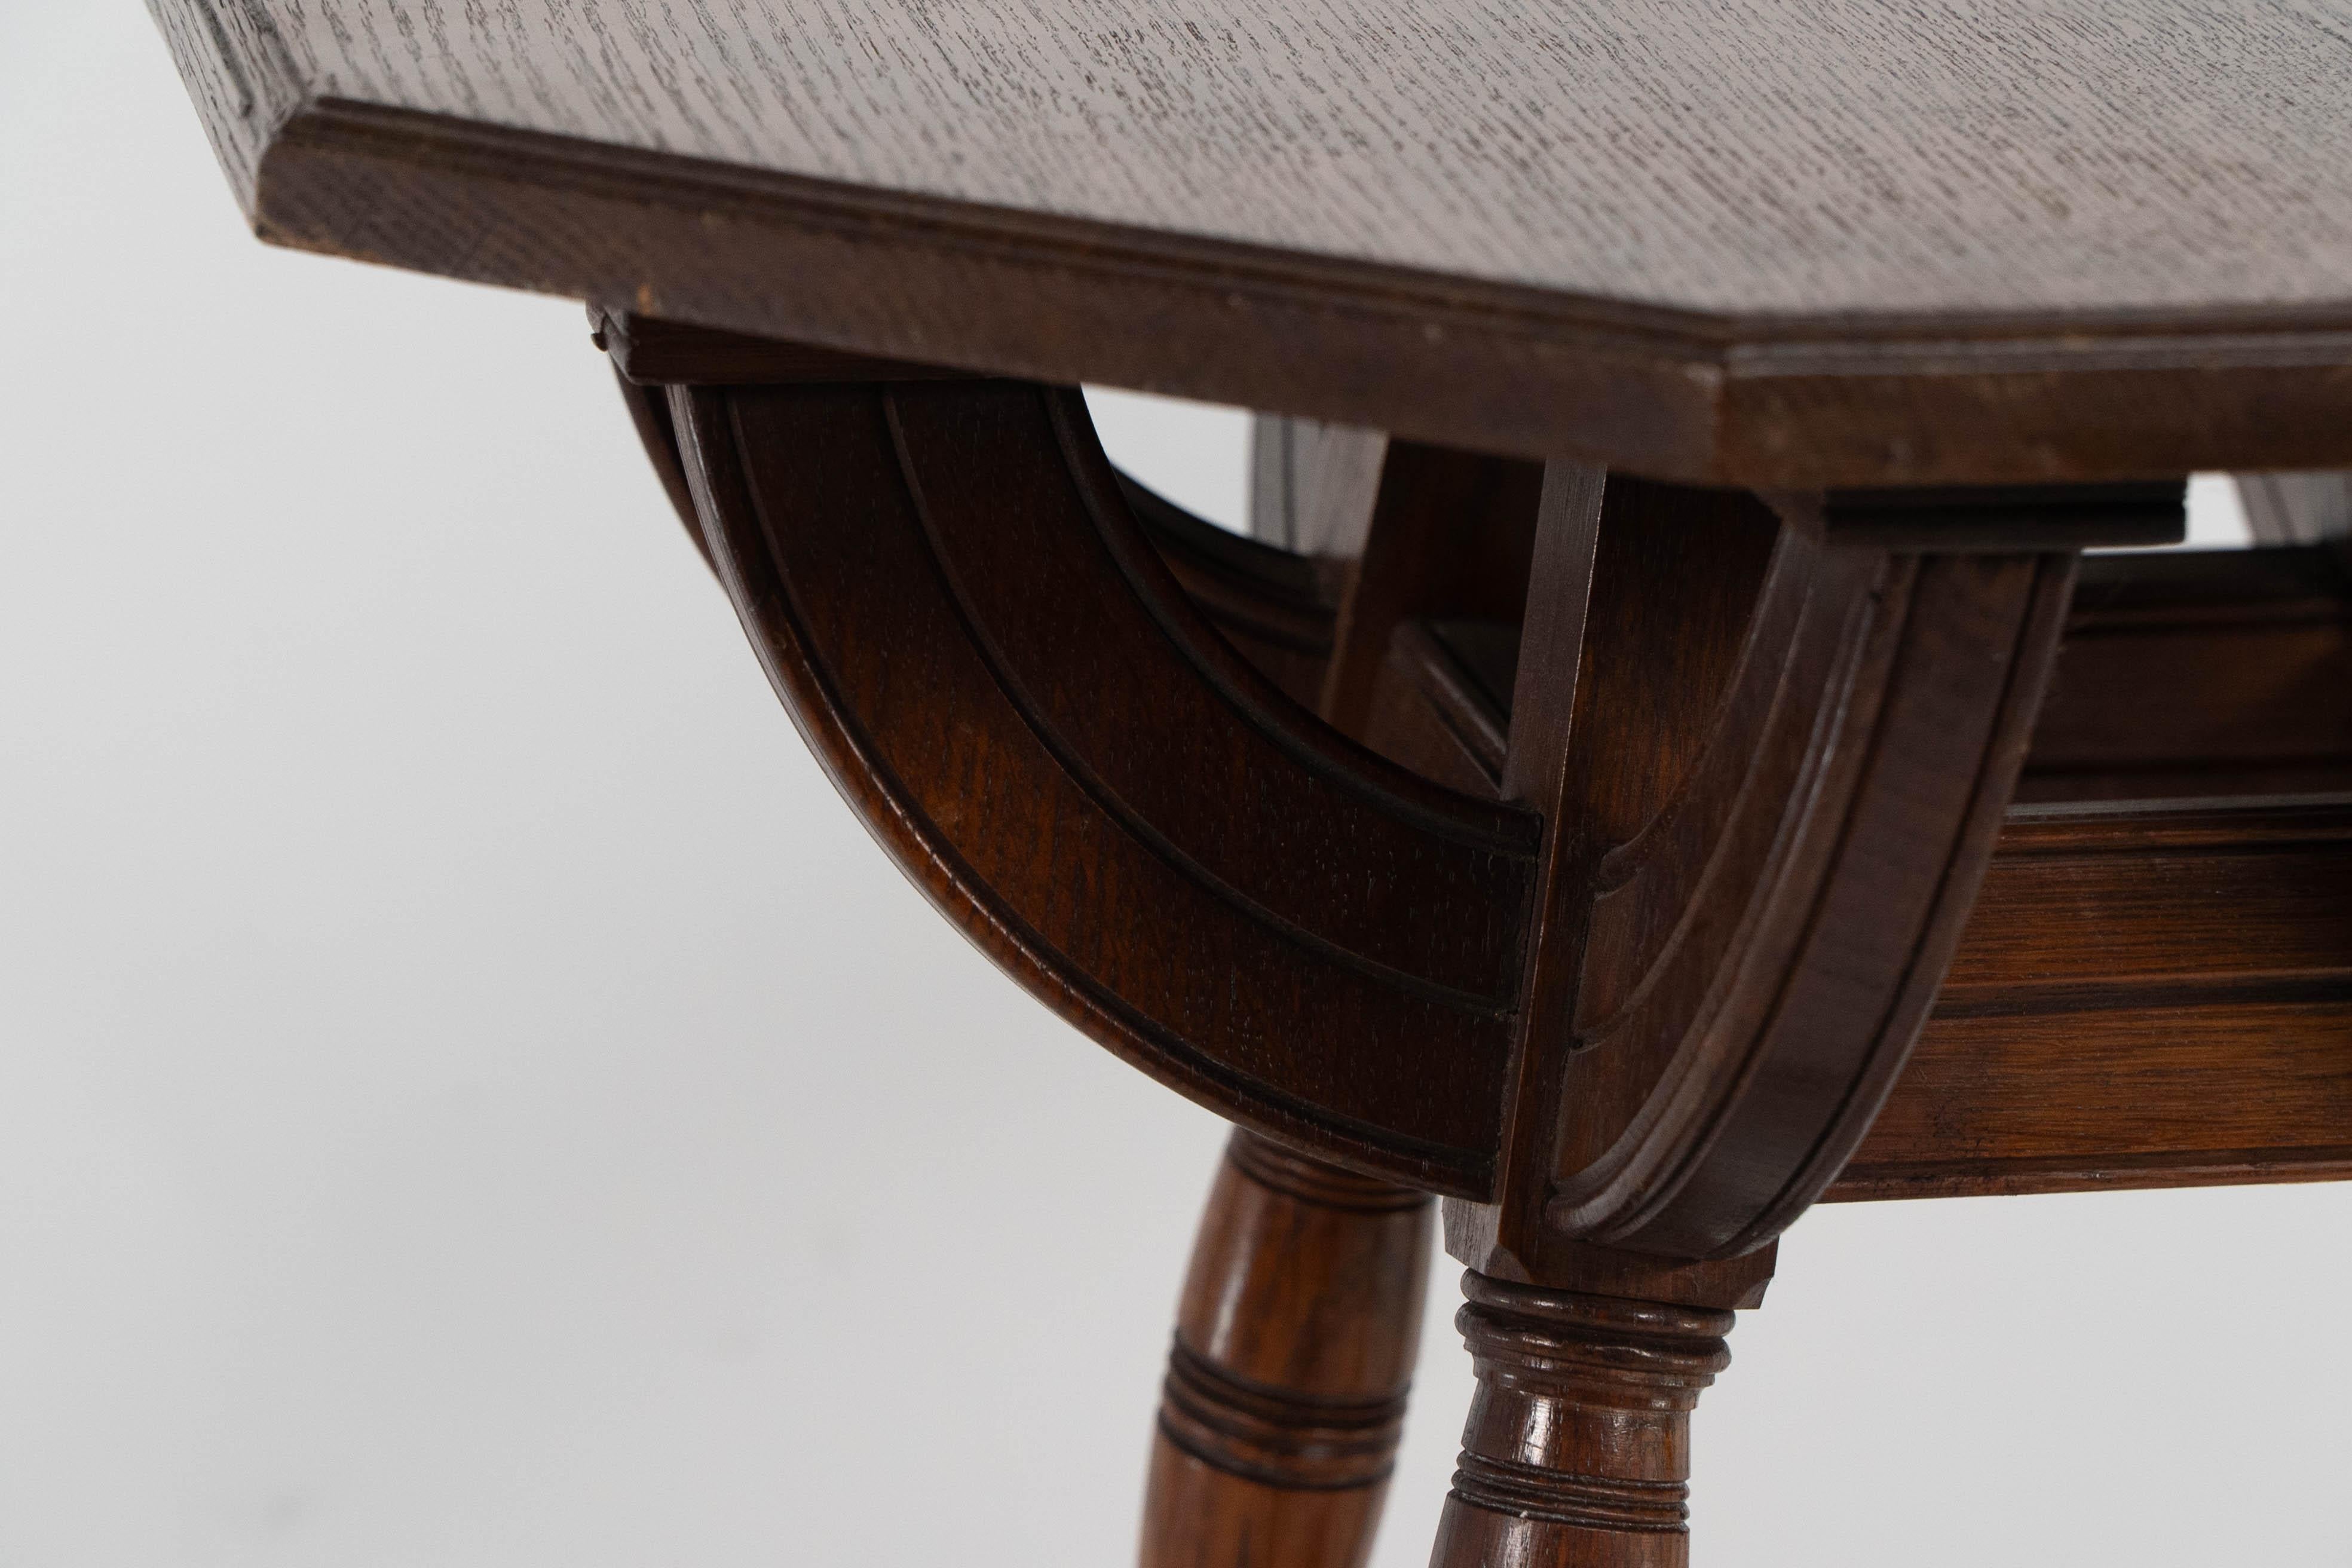 Collier and Plucknett. A rare Gothic Revival oak side table For Sale 6